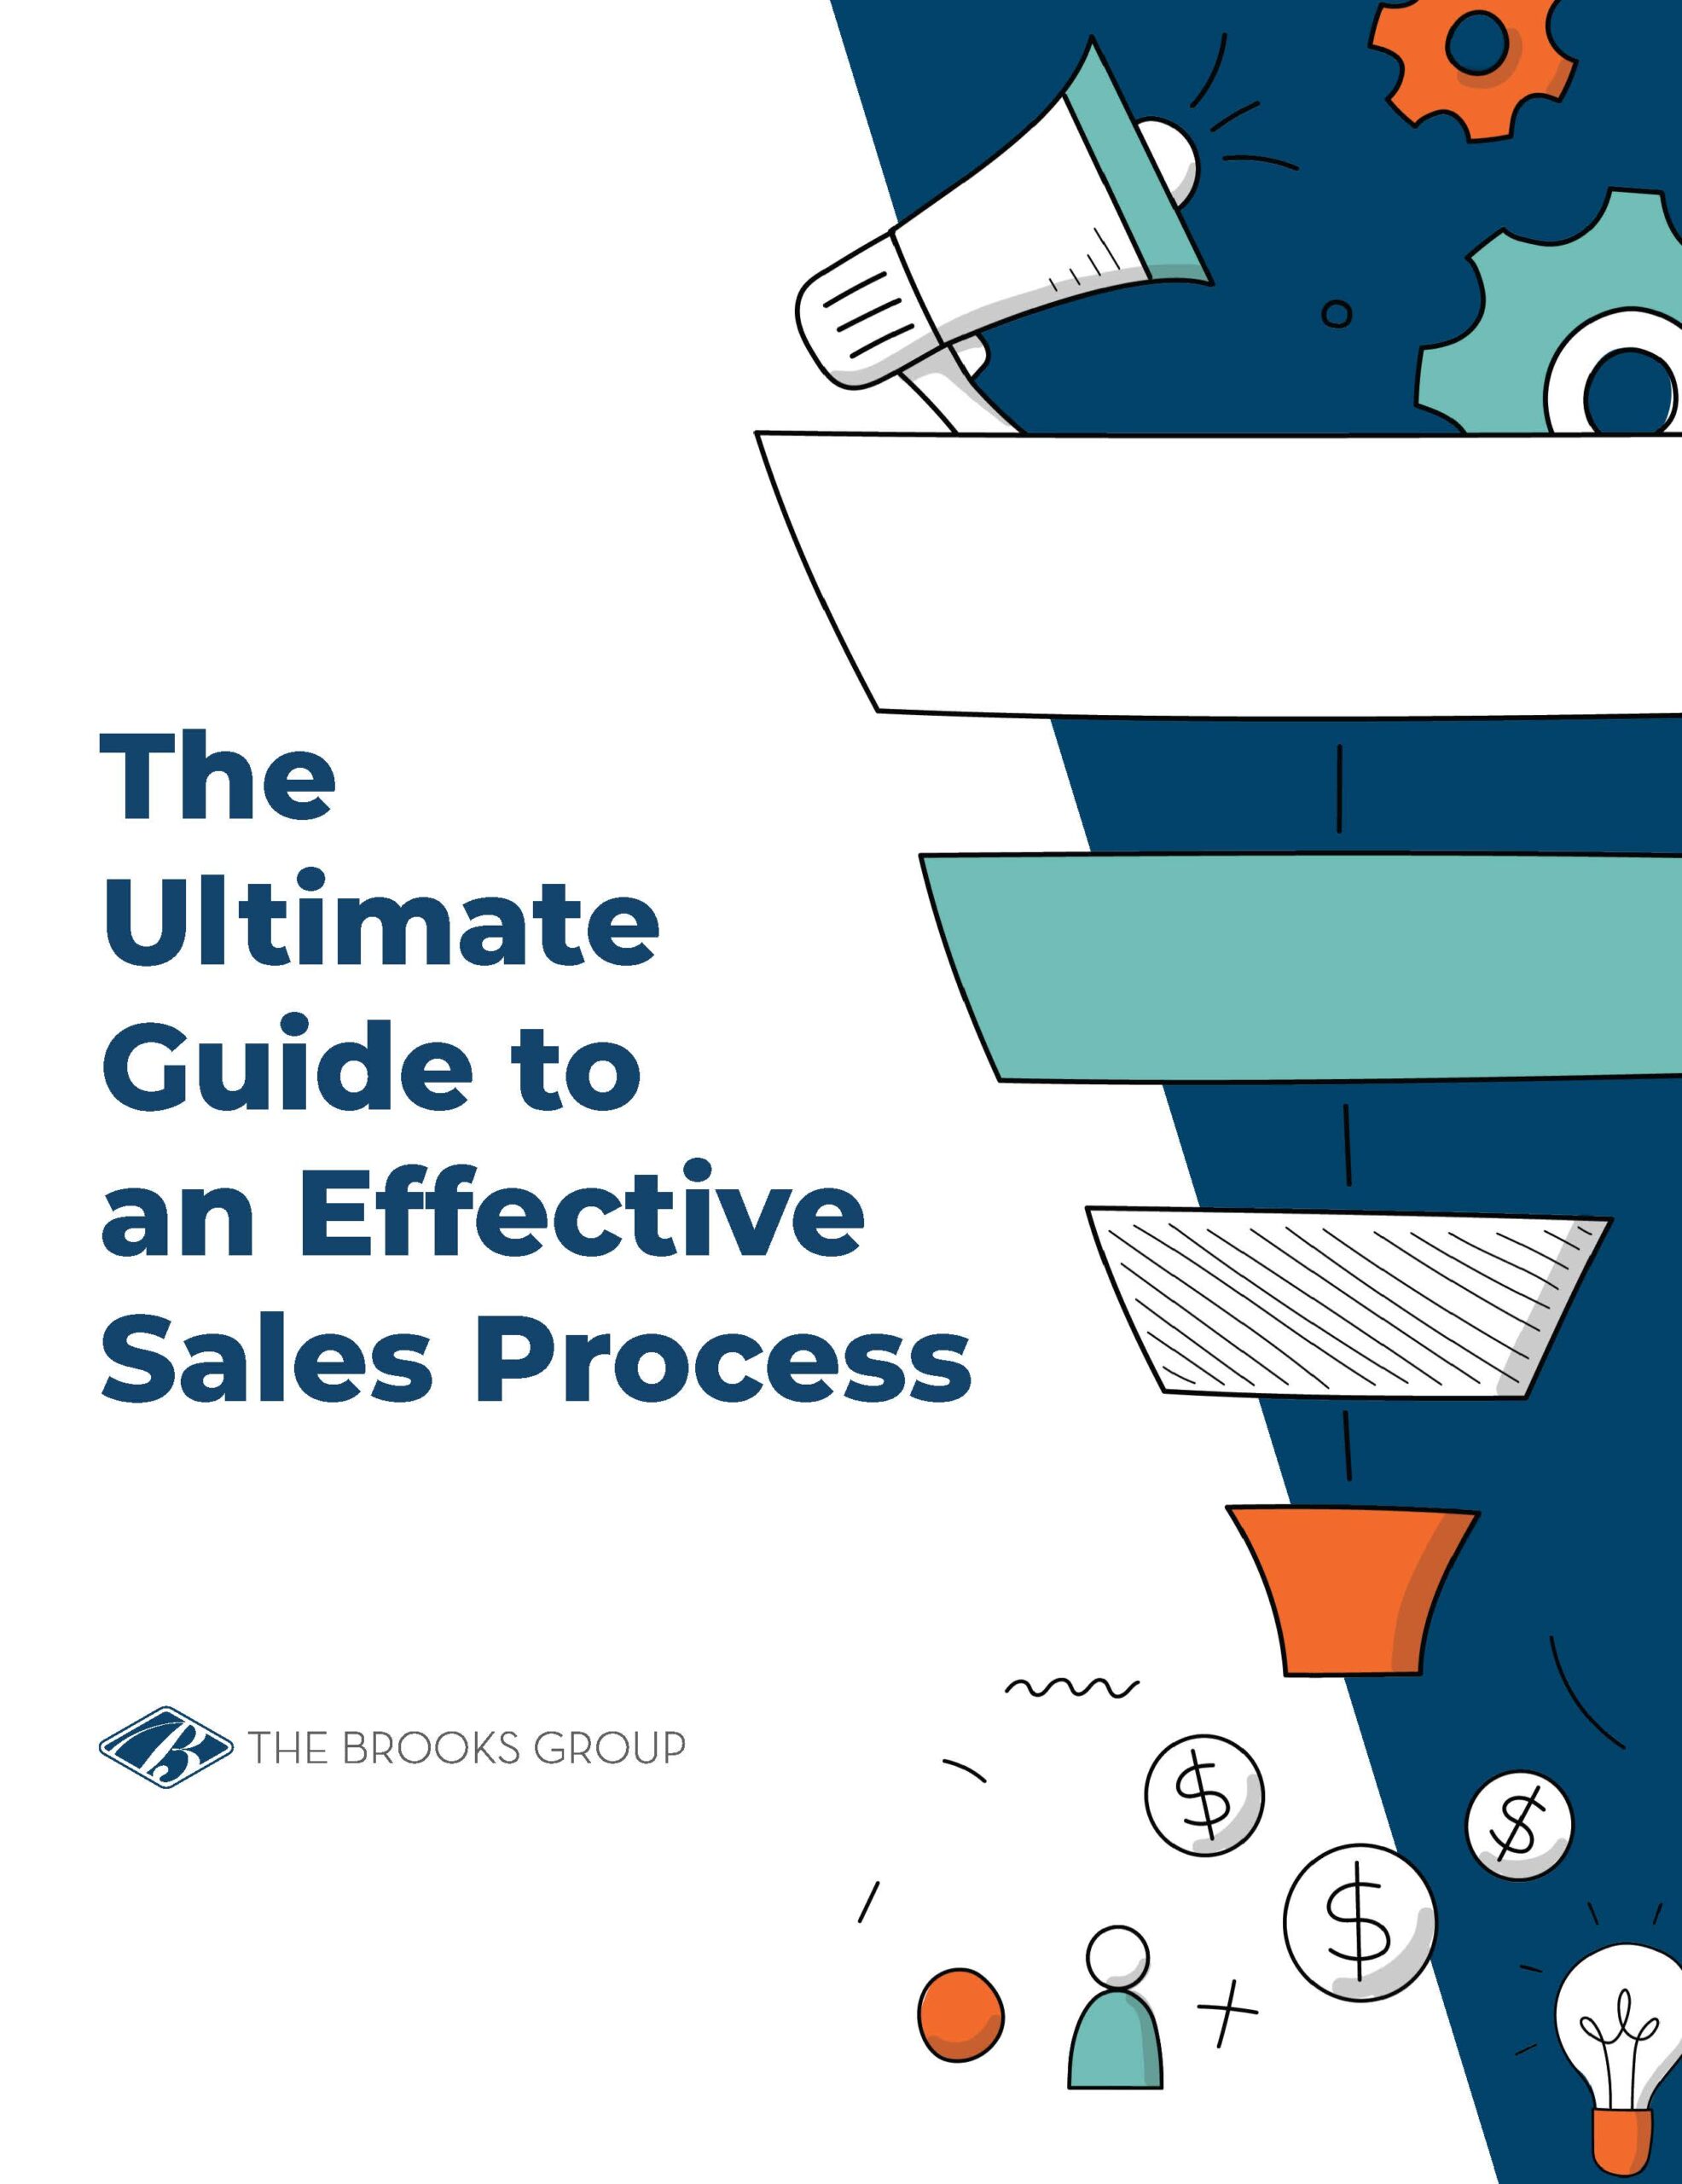 The Ultimate Guide to an Effective Sales Process